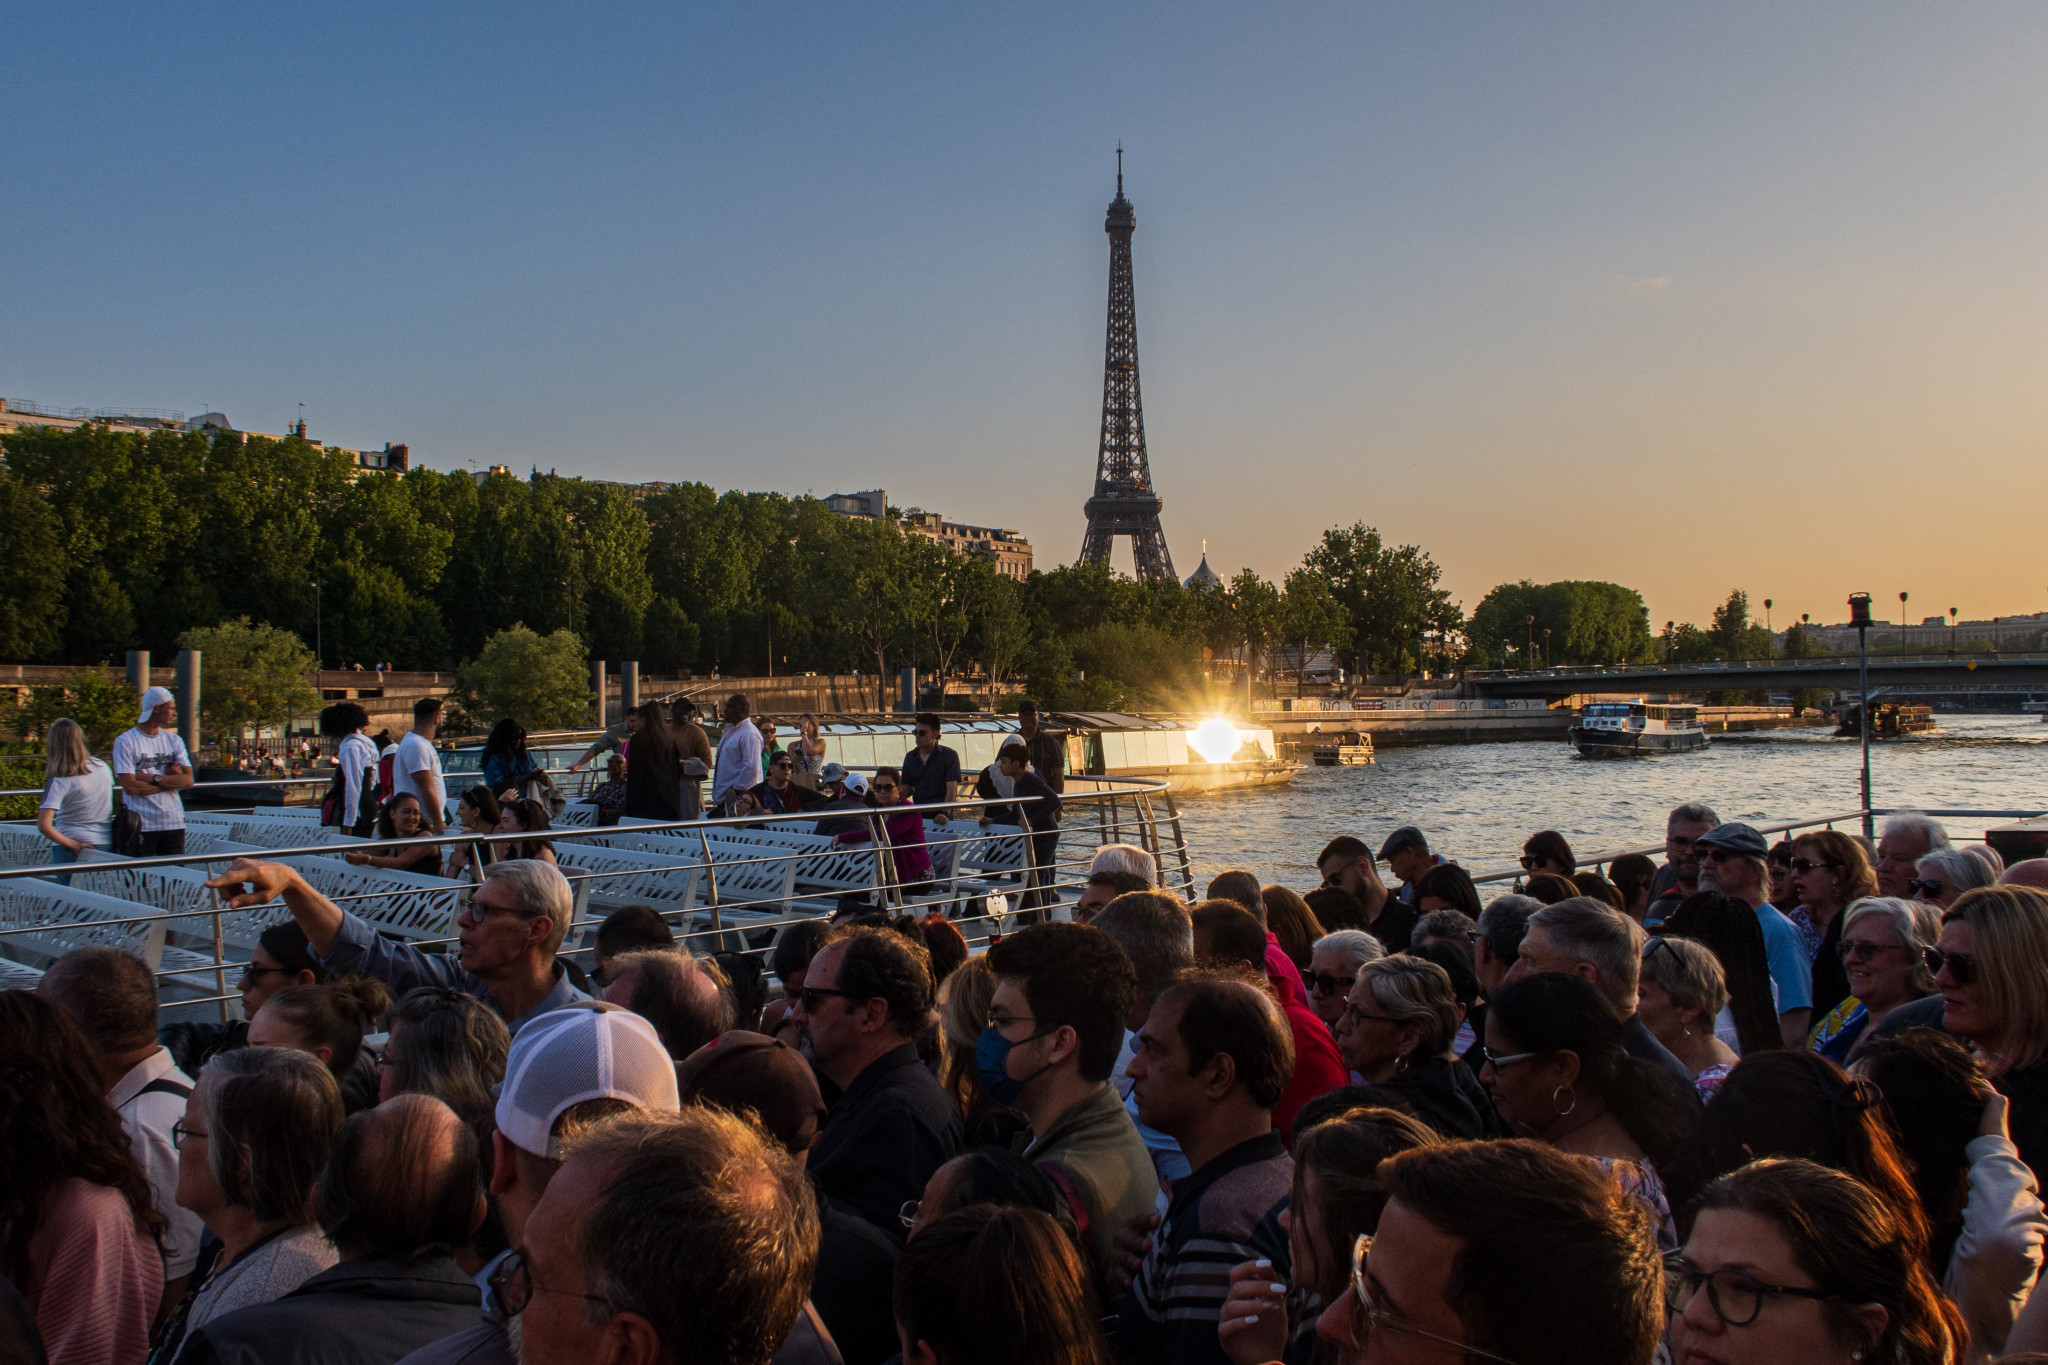 The decision to host the Olympic Opening Ceremony on the River Seine creates a security challenge ©Getty Images